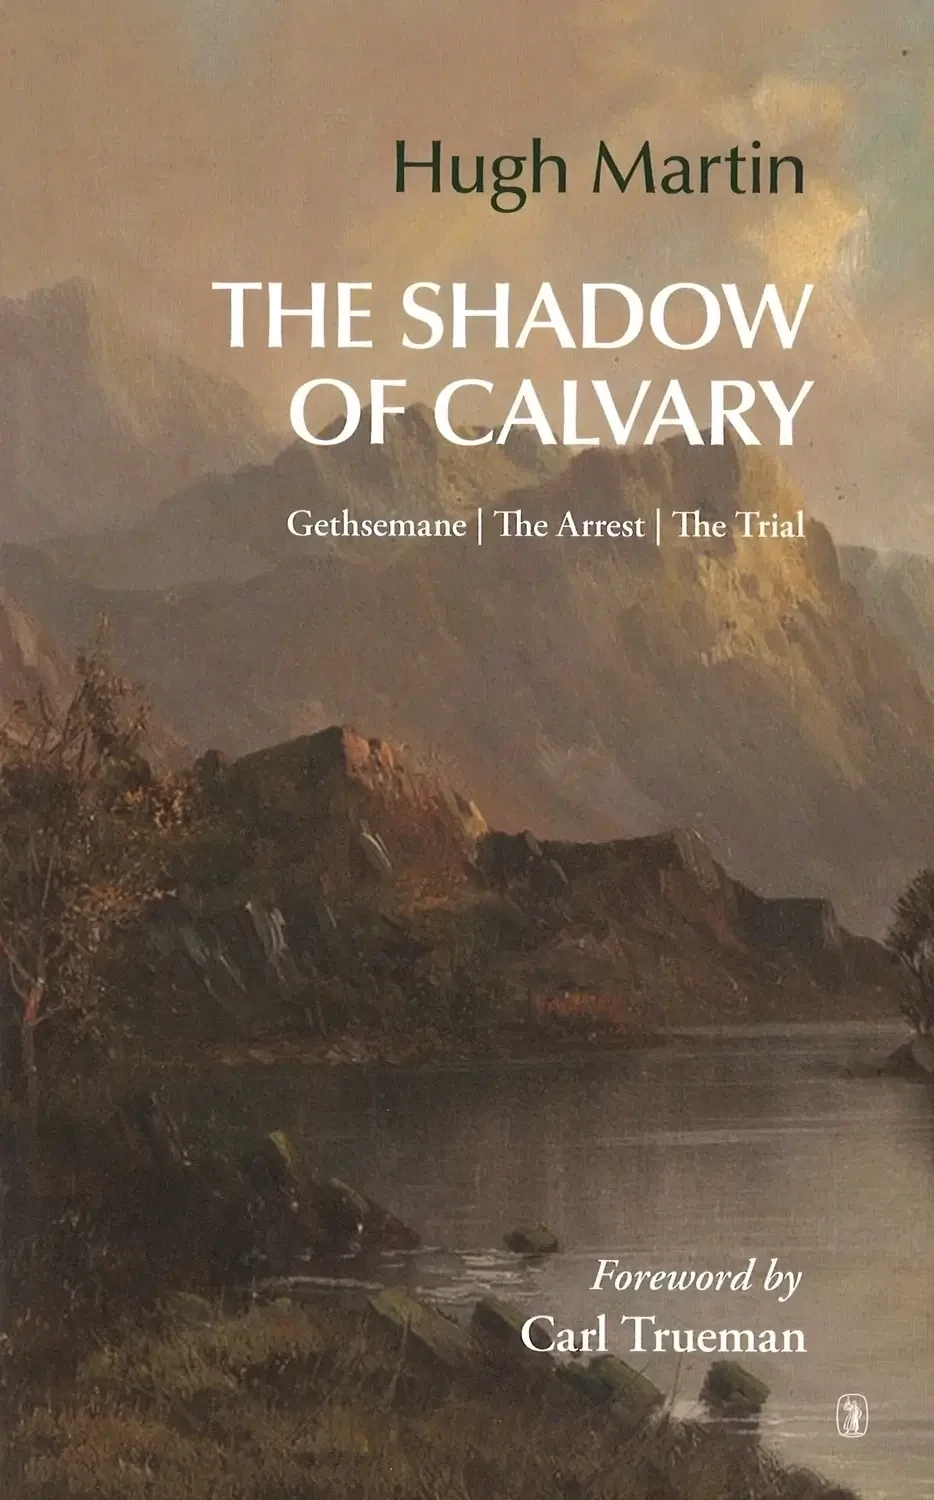 The Shadow of Cavalry by Hugh Martin